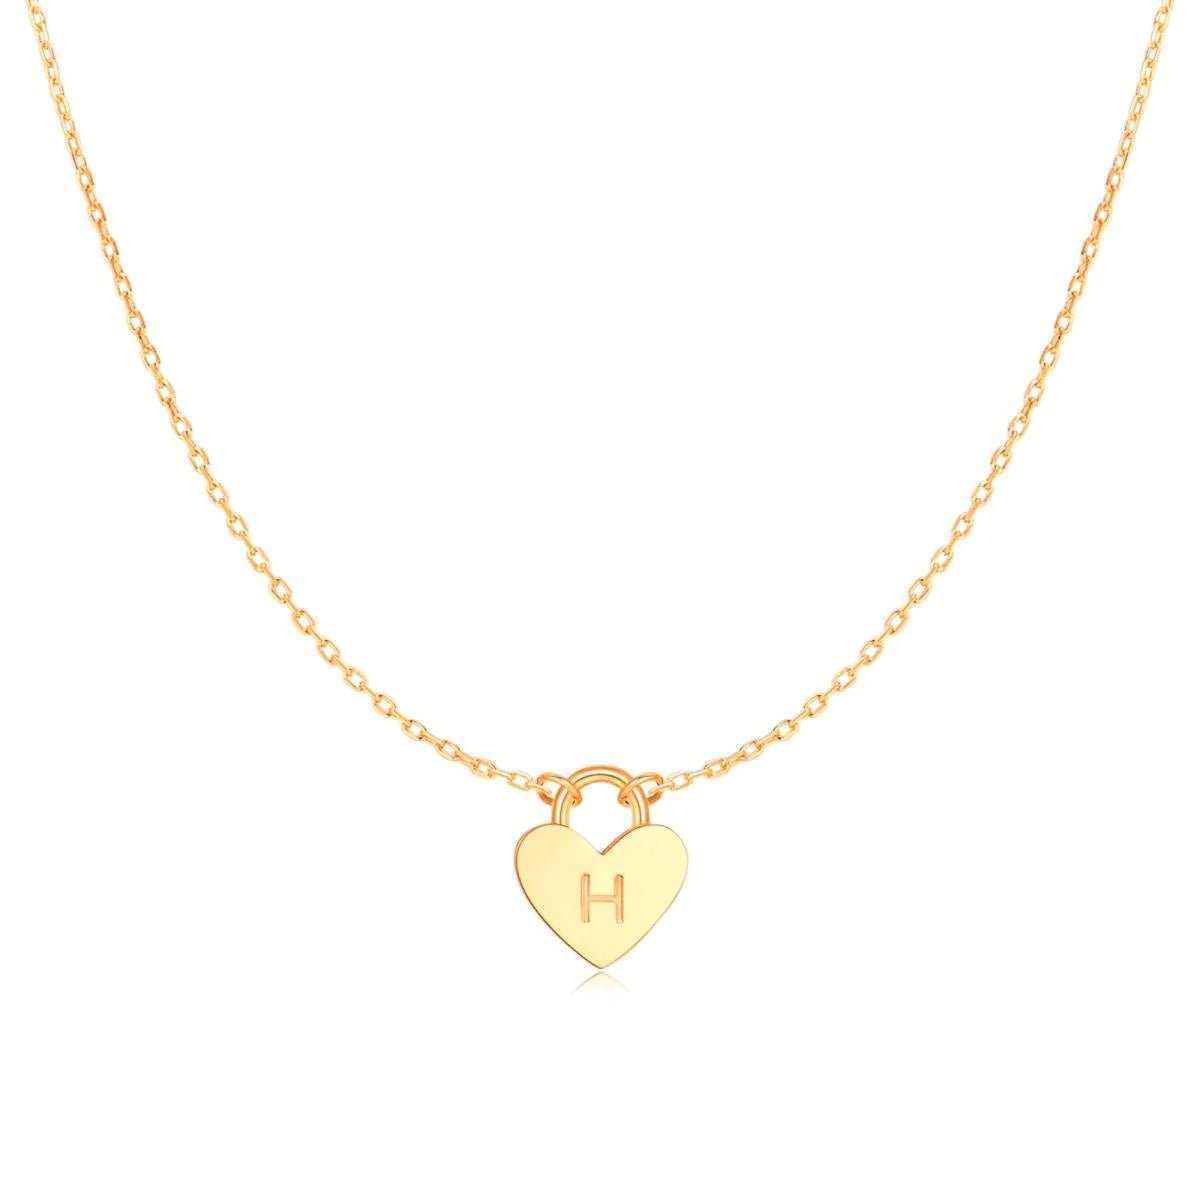 Gold Plated Enamel Heart Initial Necklace – JOY by Corrine Smith